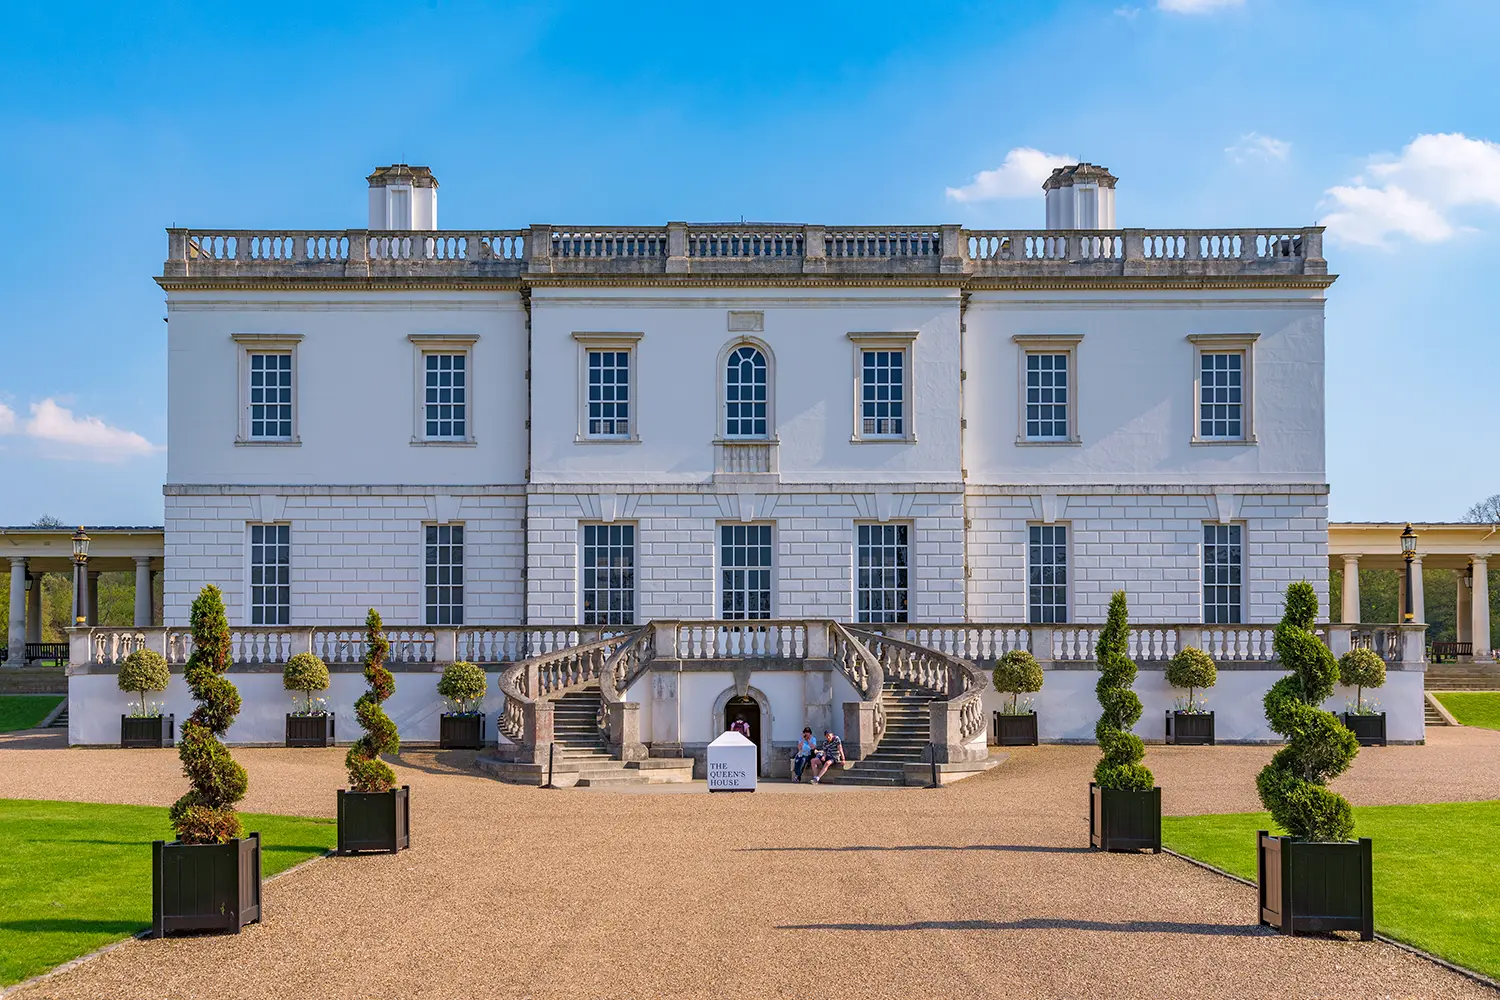 Queen's House, an historic landmark and travel destination in Greenwich, London, UK